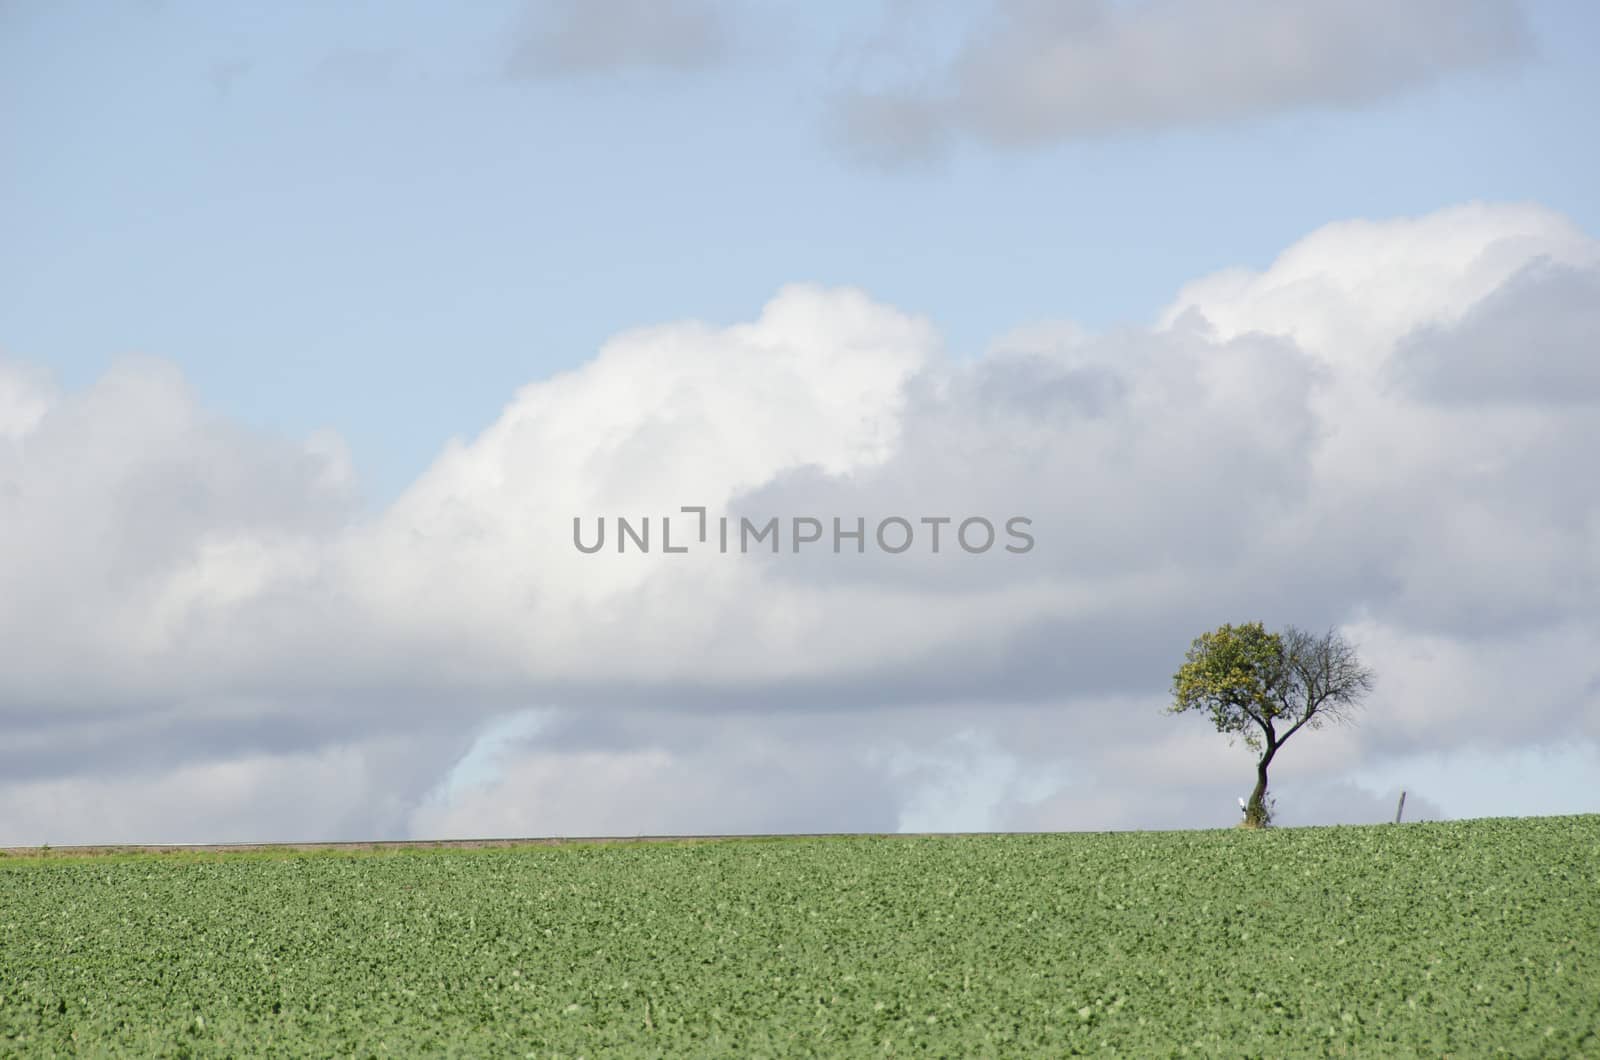 Tree on a field with road by Arrxxx